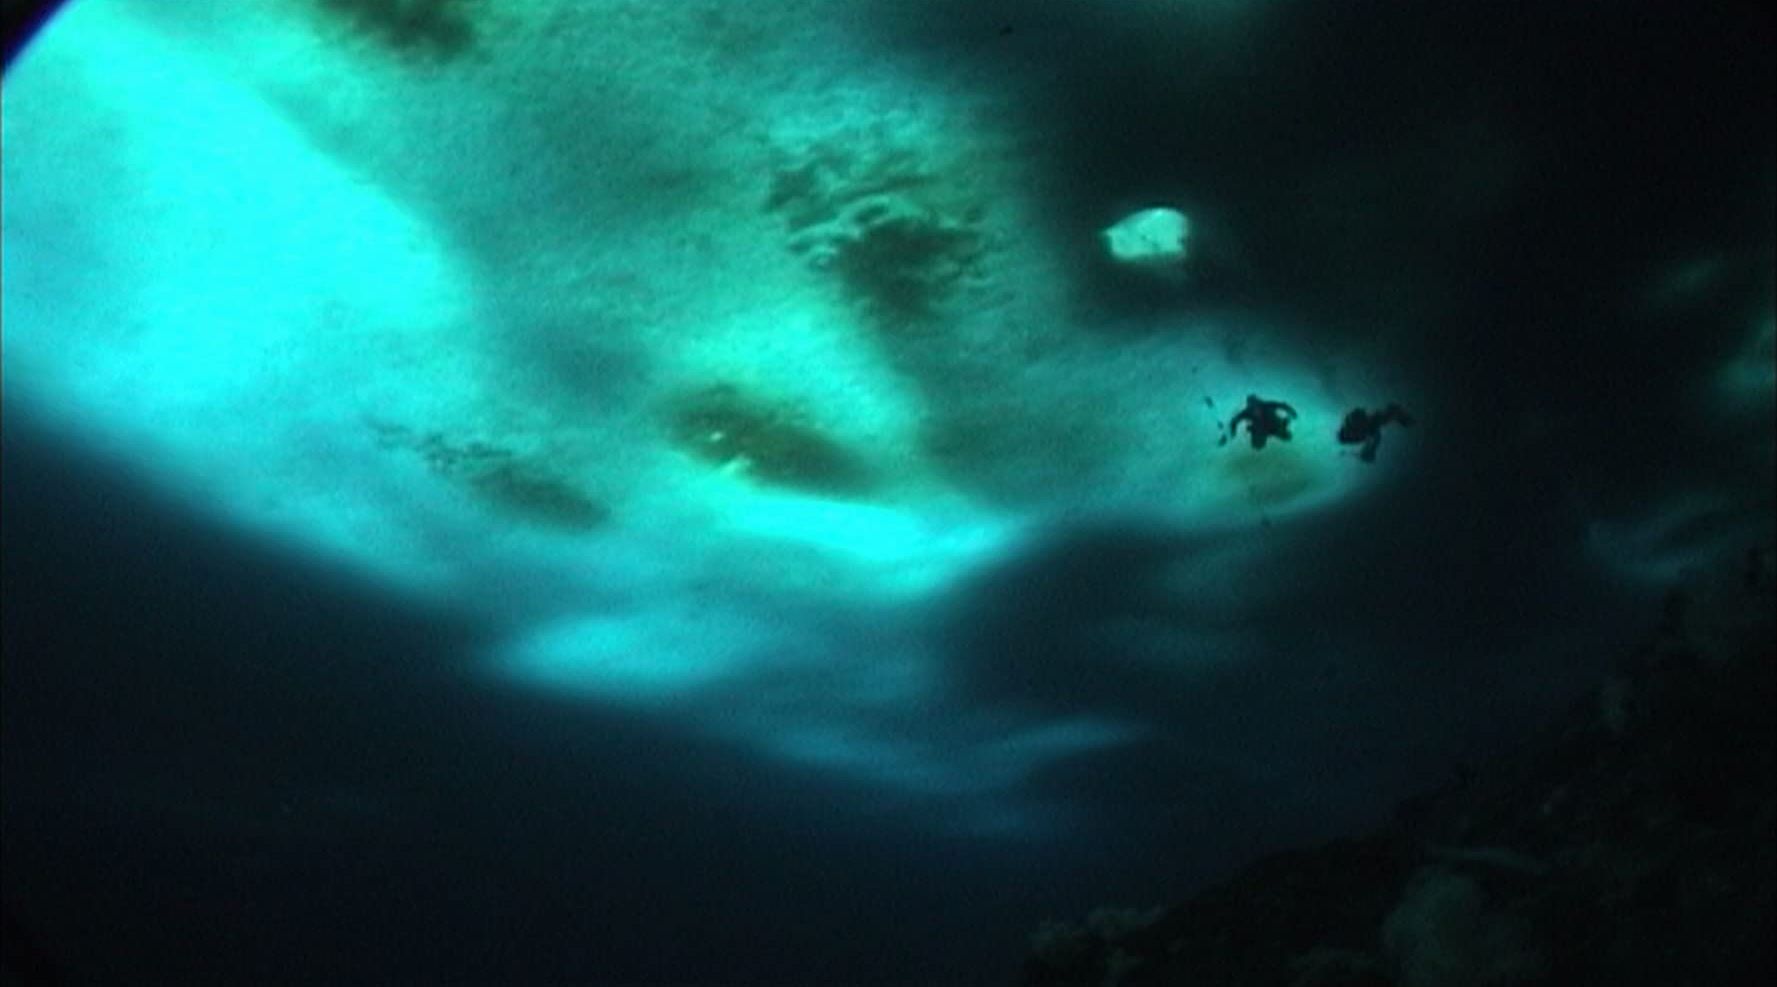 The astronauts explore the alien plant (in actuality documentary footage of divers beneath the Antarctic icecap) in The Wild Blue Yonder (2005)